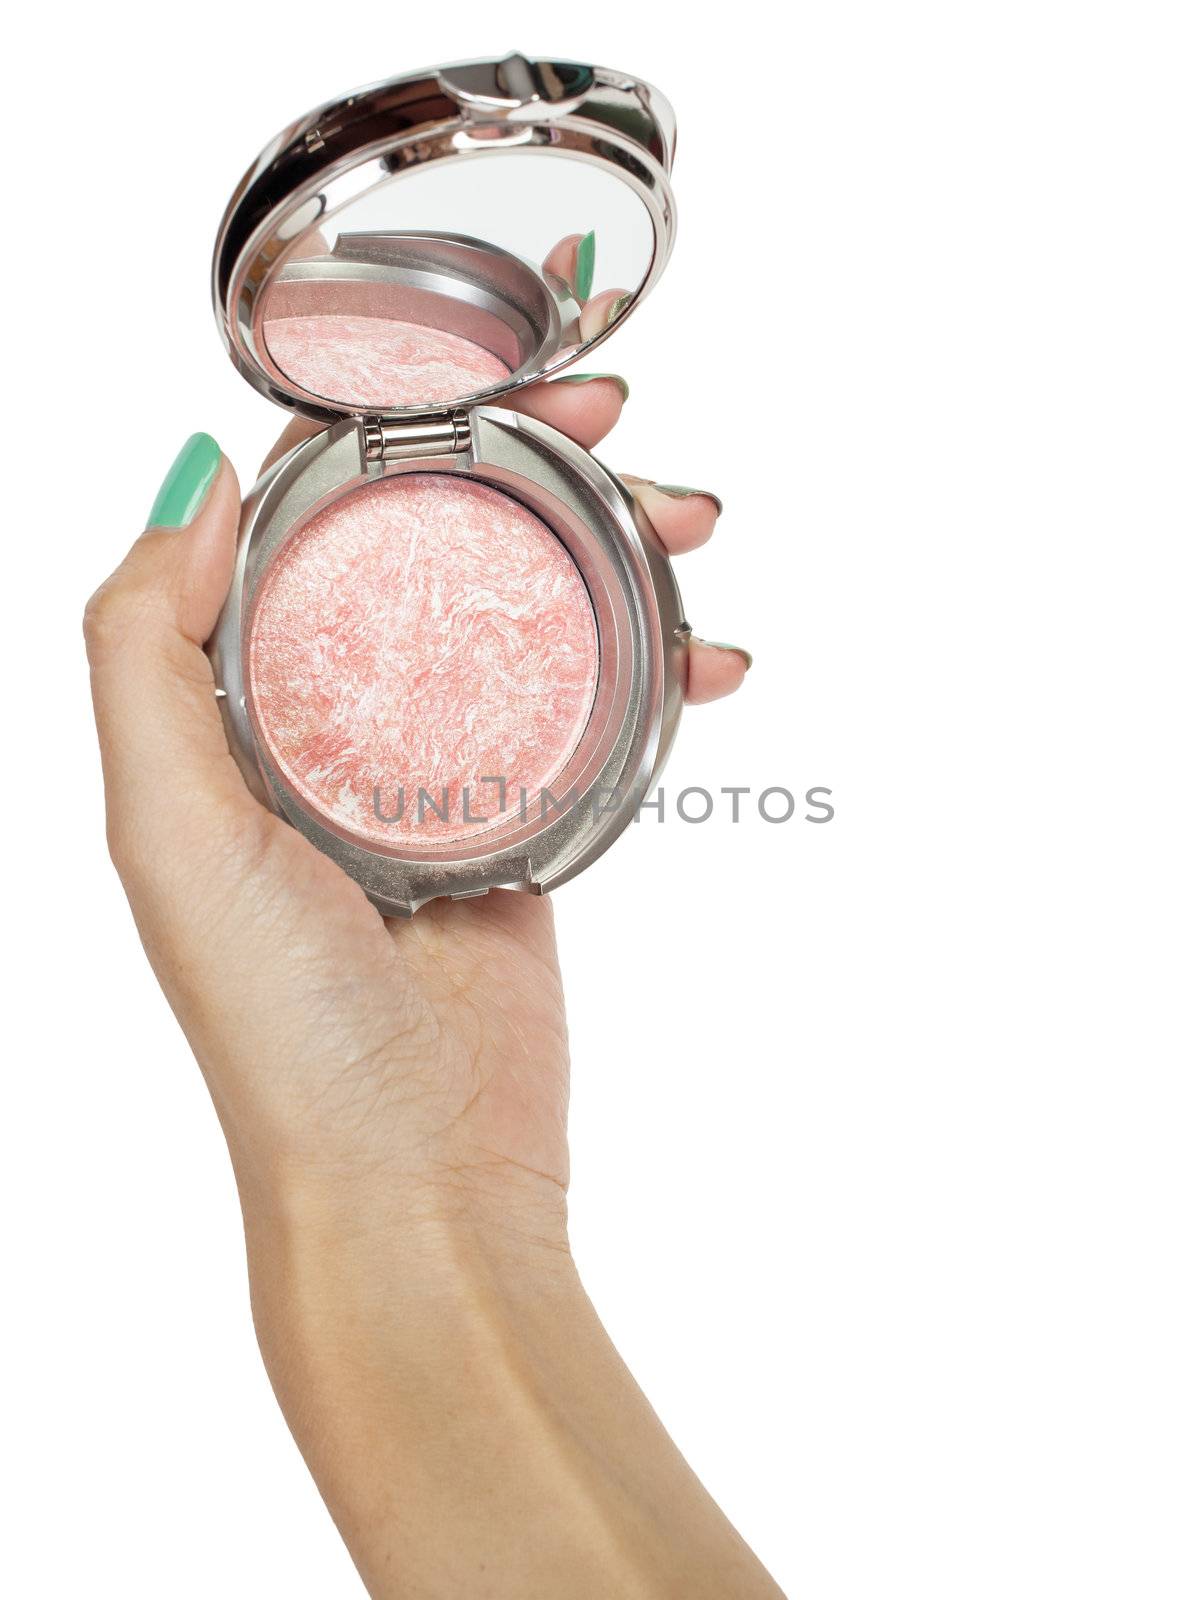 Cosmetic powder and hand by FrameAngel